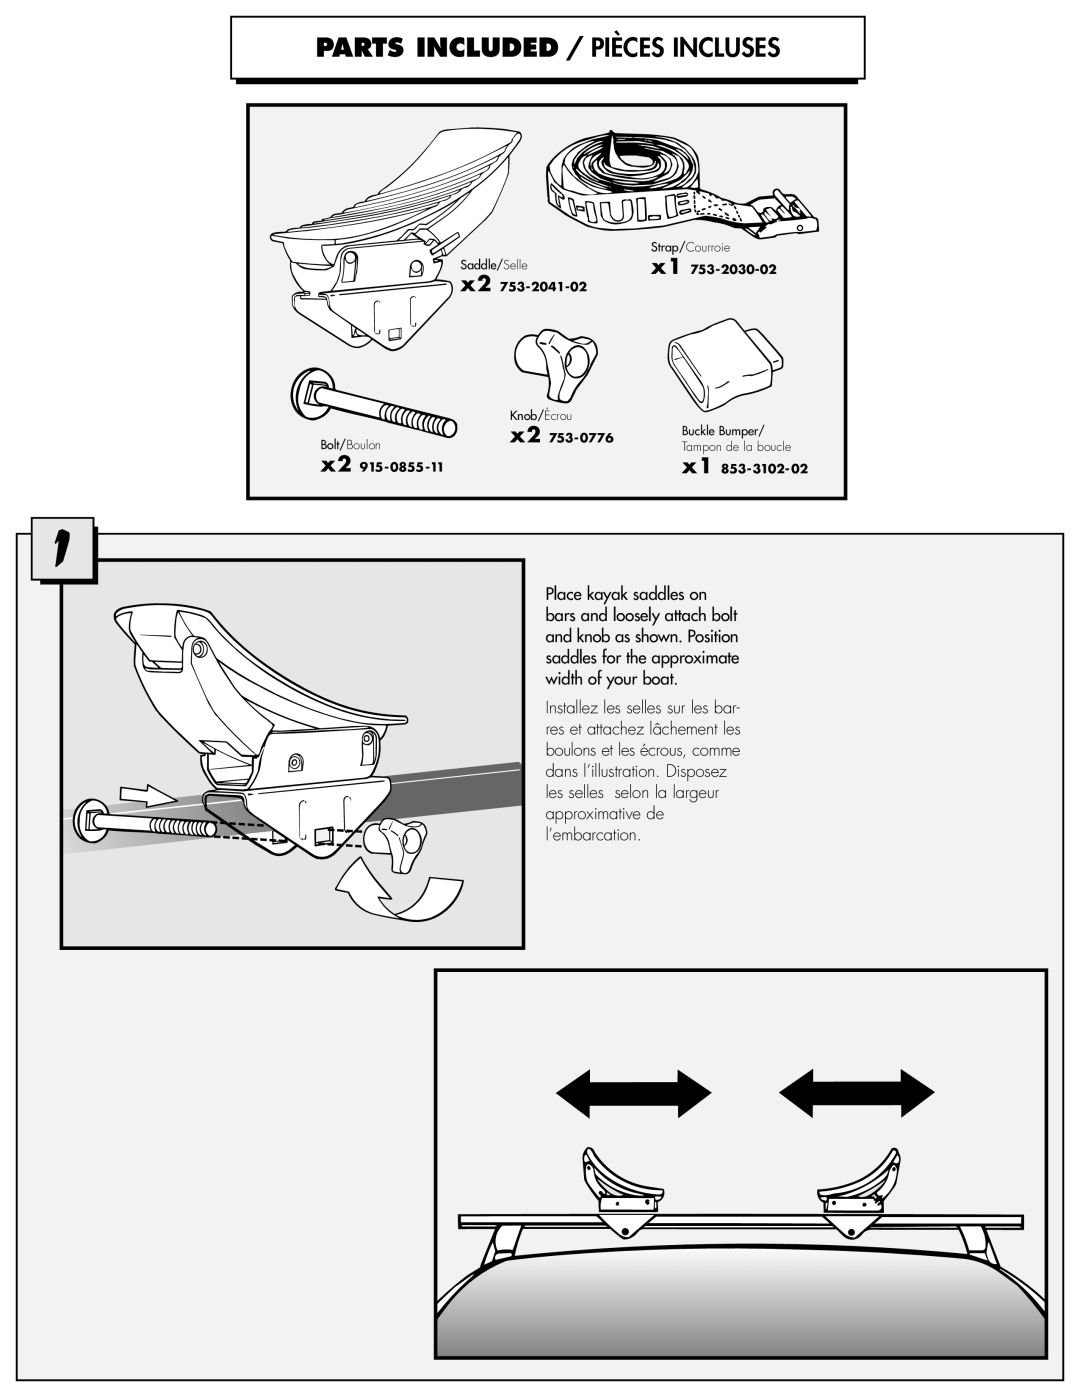 Thule 876 installation instructions Parts Included / Pièces Incluses 